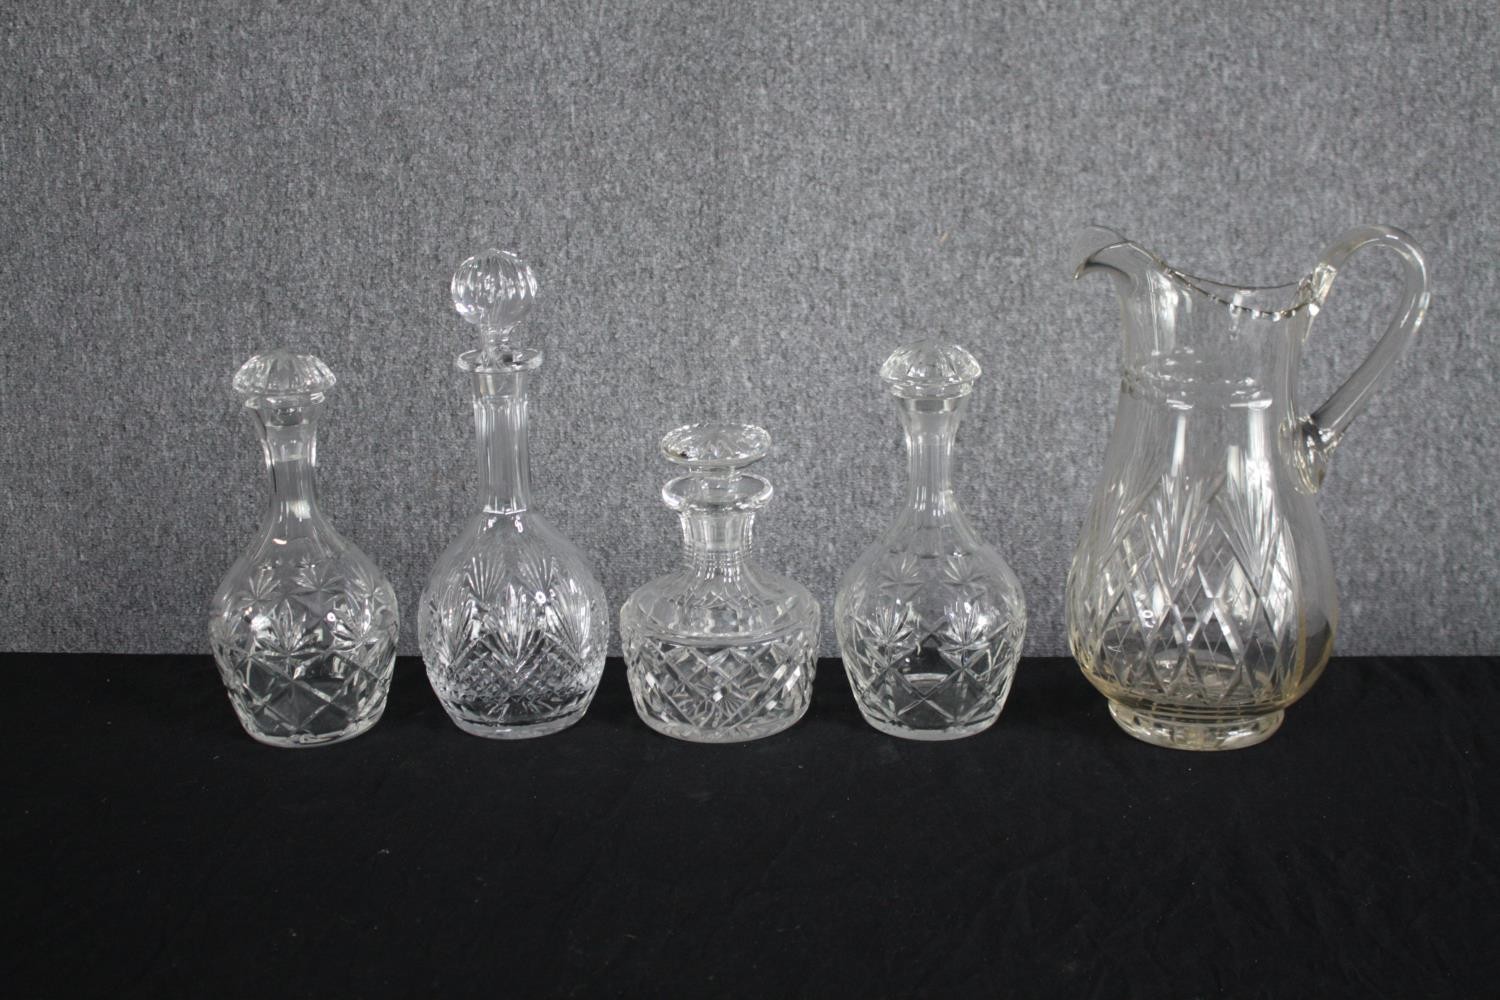 A mixed collection of four glass decanters and a jug. Cut glass and complete with their stoppers.